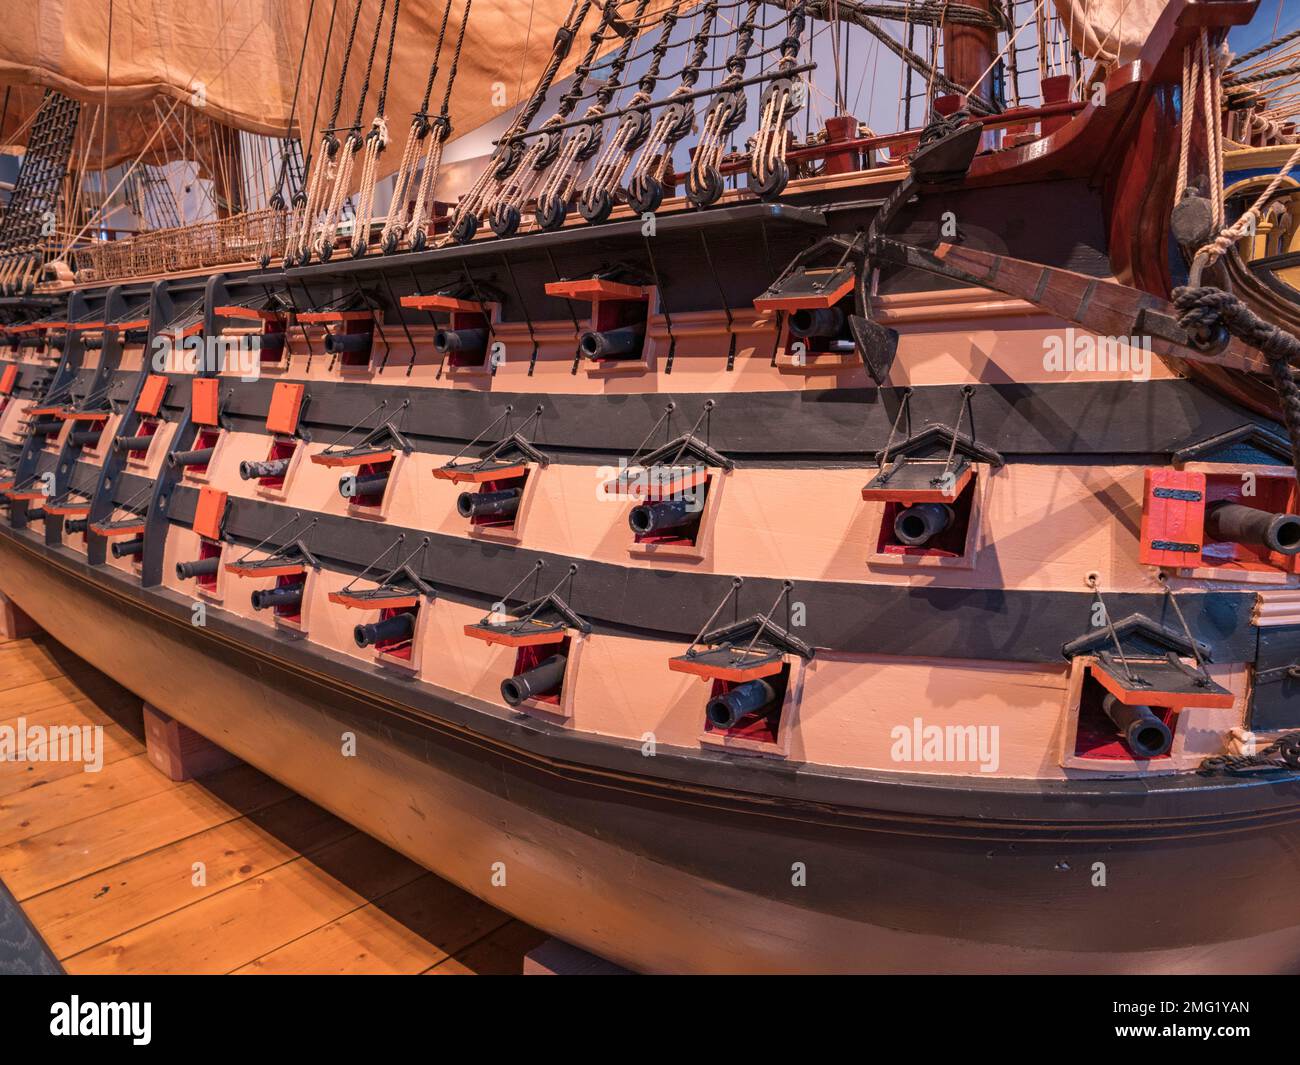 Close up view of the gun decks on a scale model of HMS Victory, Admiral Nelson's flagship launched in 1765, Historic Dockyard Chatham, Kent, UK. Stock Photo